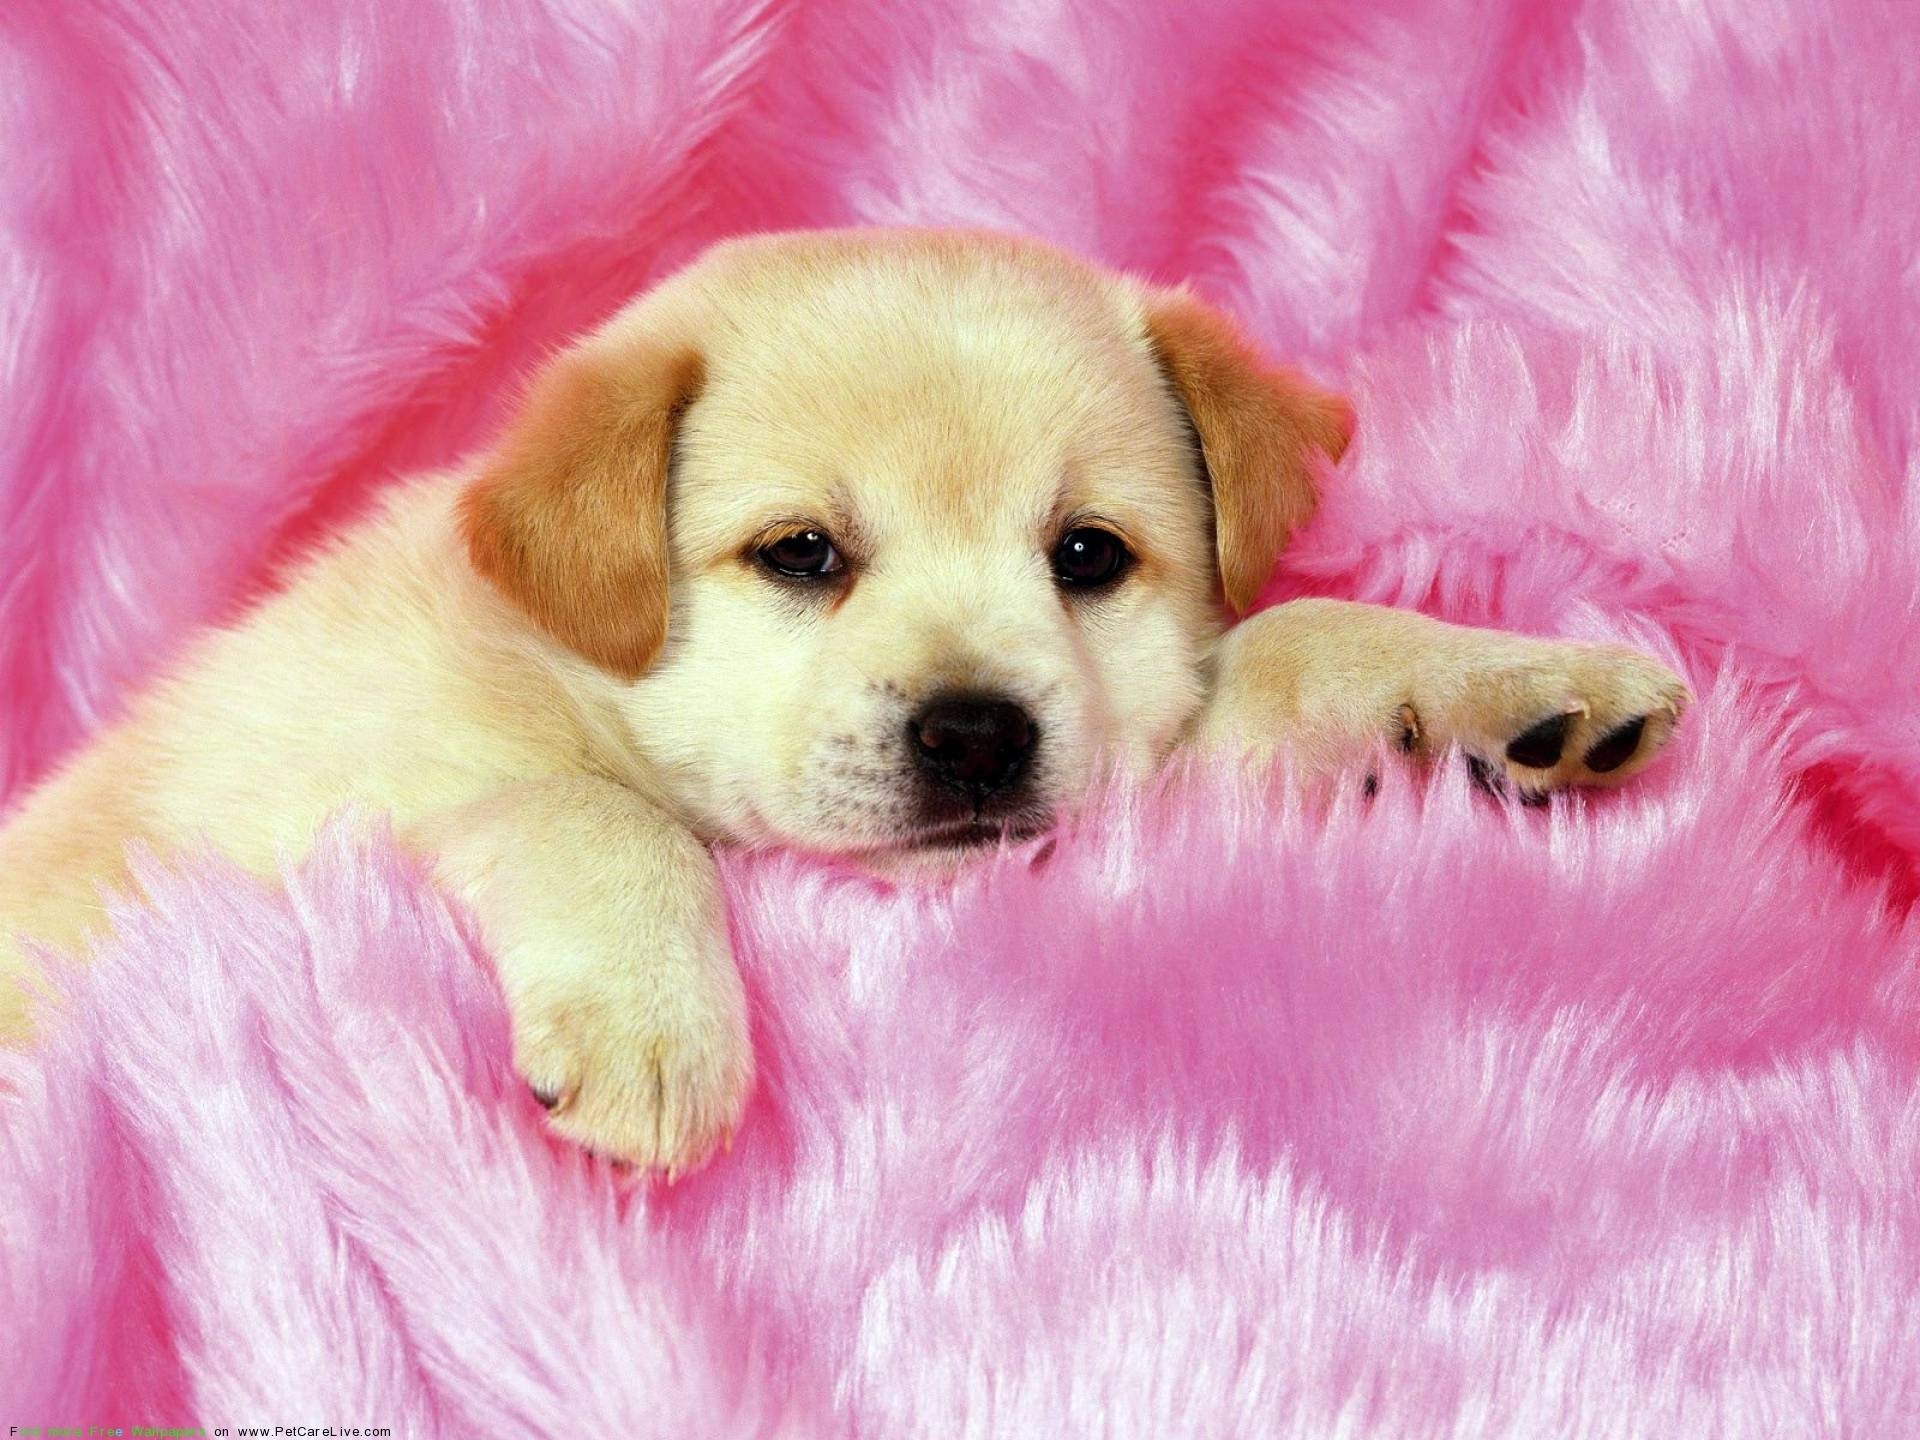 1920x1440 Cool cute puppy pictures wallpaper with cute dogs and puppies wallpapers  wallpaper cave